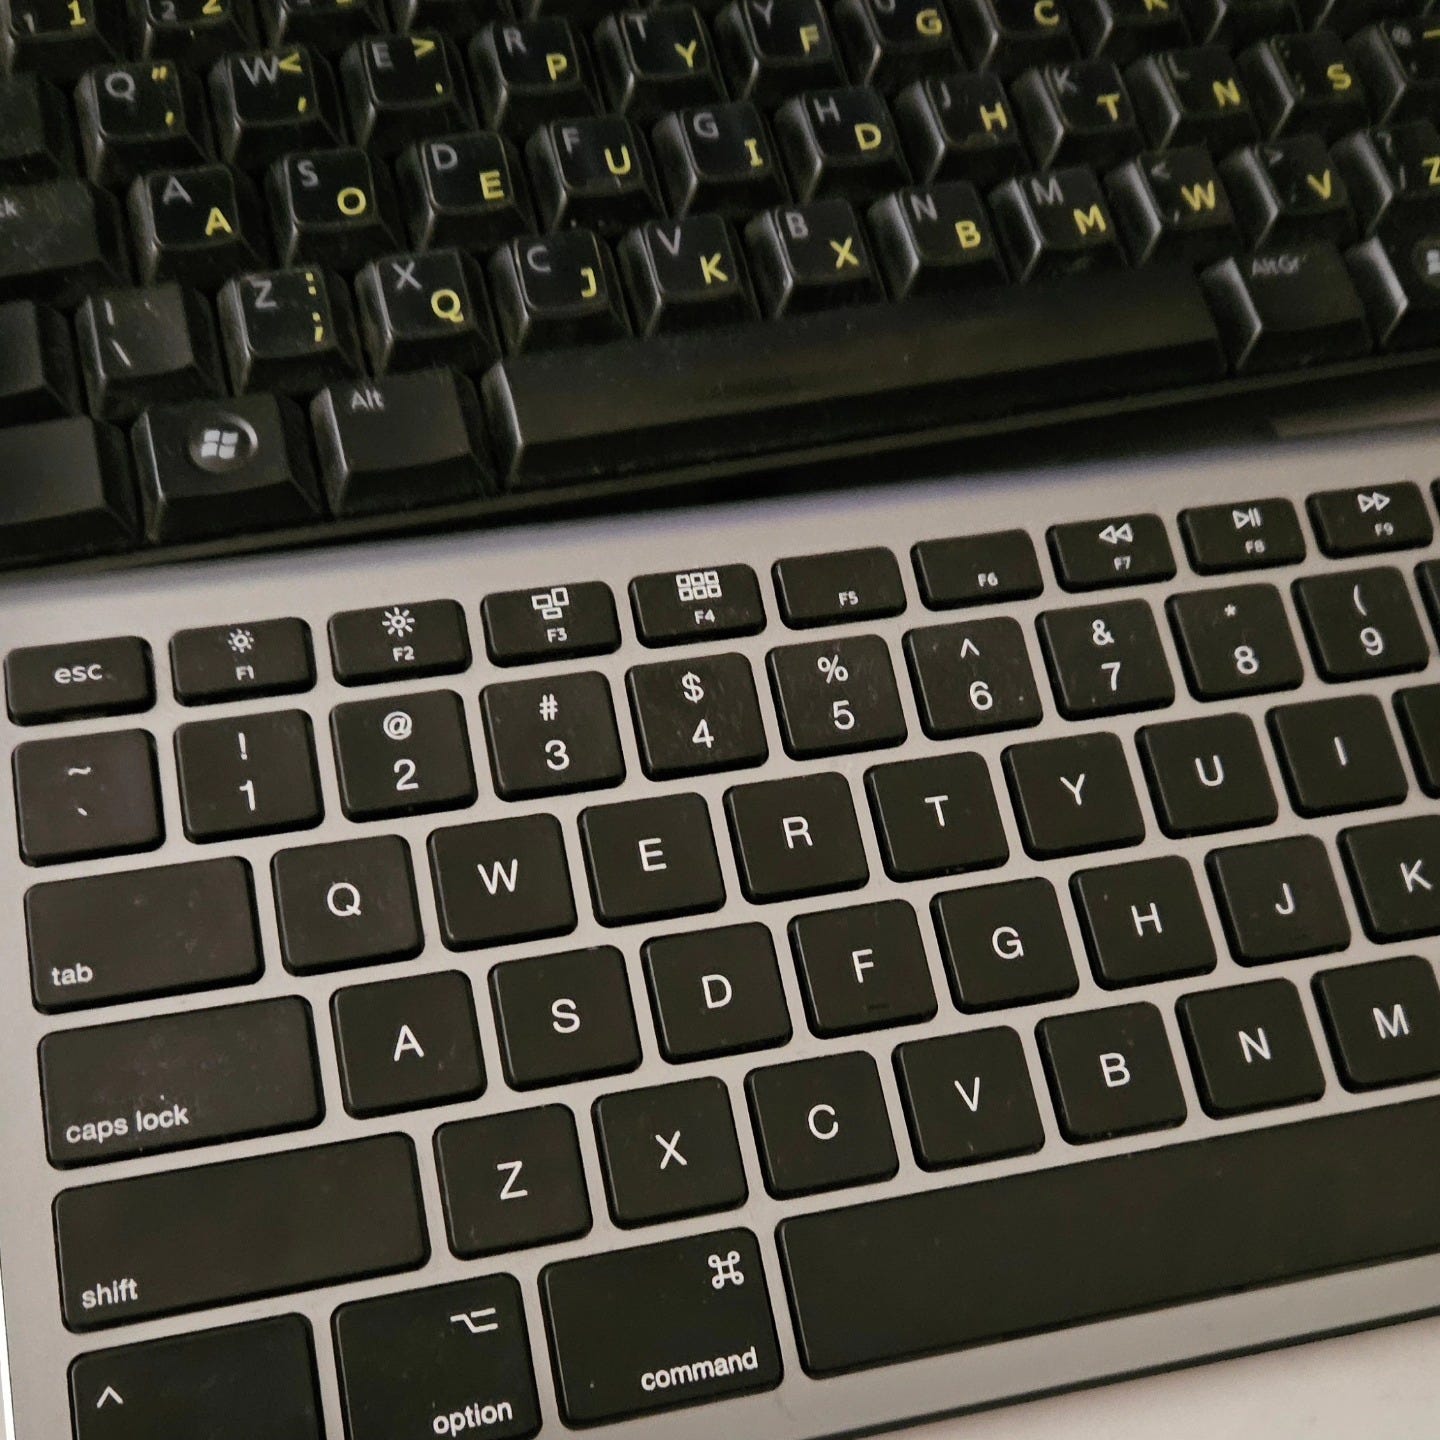 Image of two keyboards on Damon Lord's desk, the top is a black Windows keyboard with Dvorak layout on it in yellow, and the lower keyboard is a silver and black standard Mac keyboard.